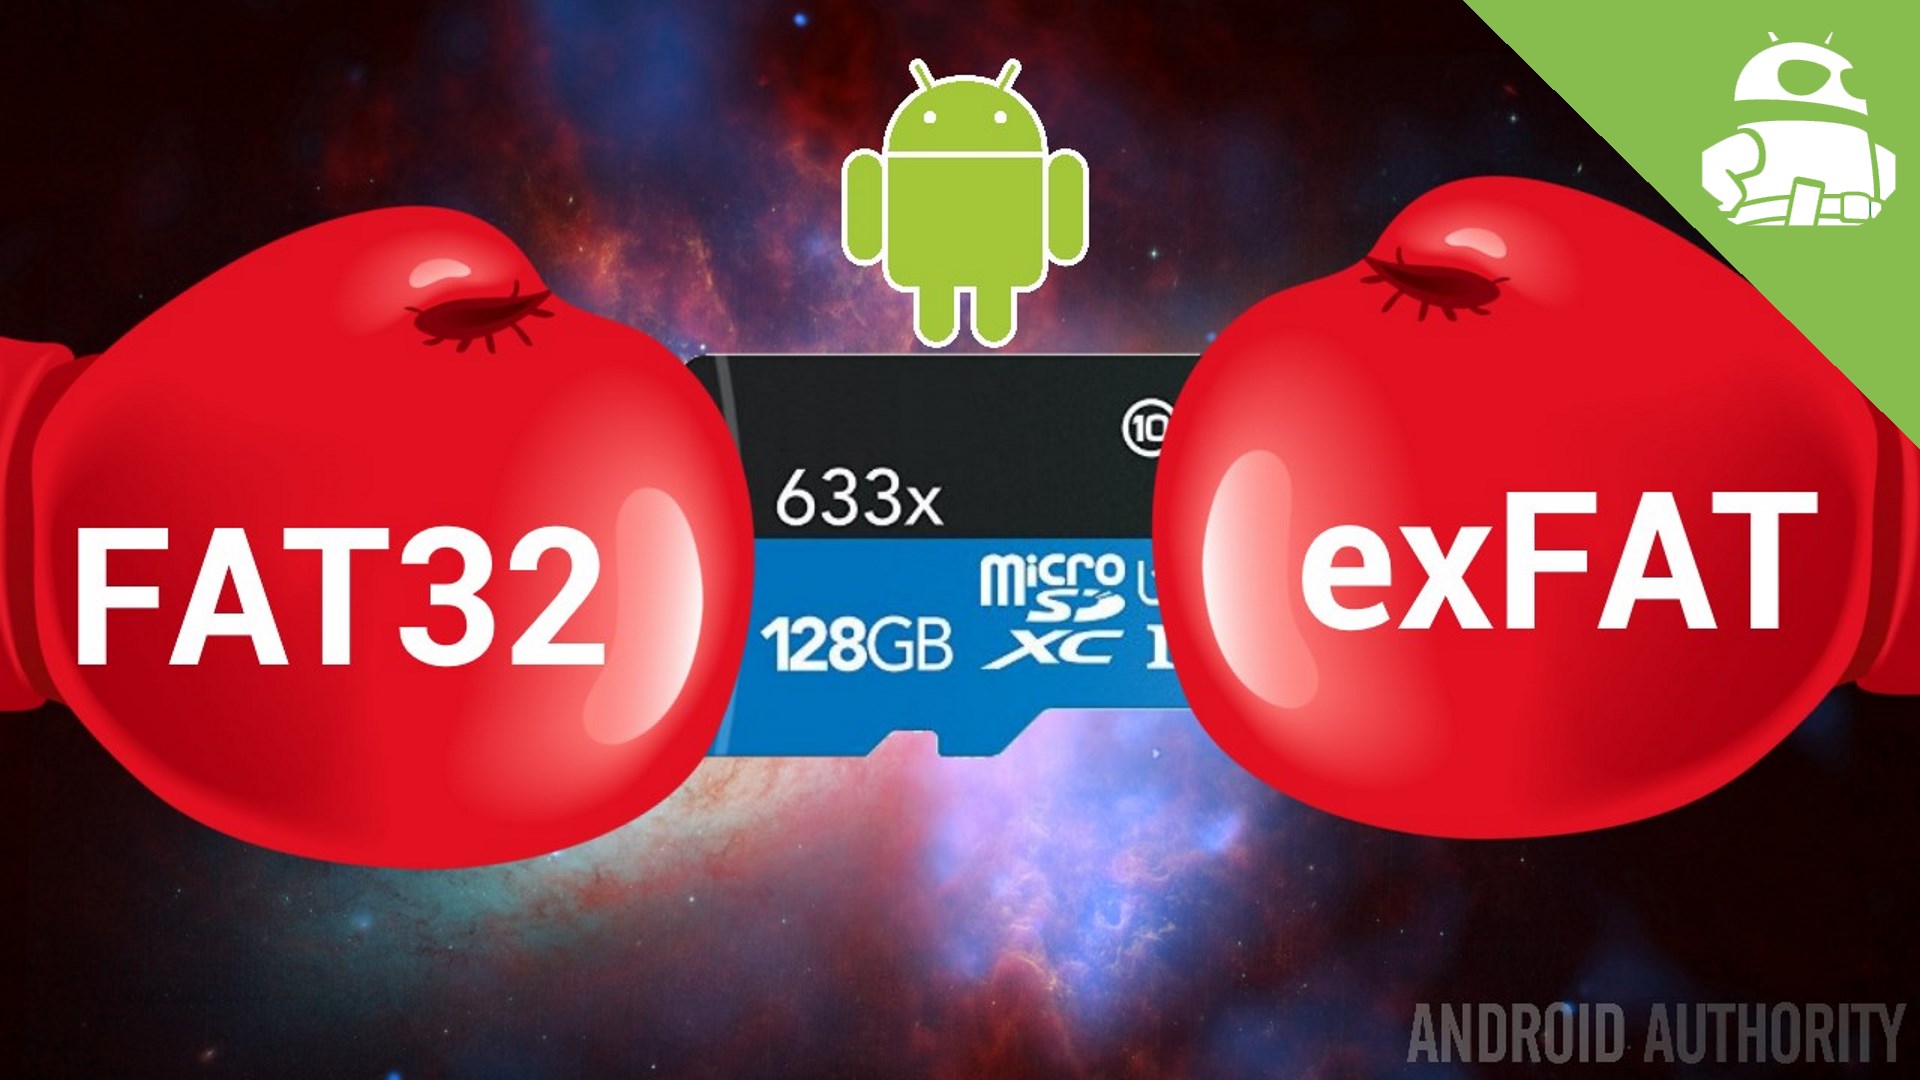 Fate appear Must High capacity microSD cards and Android - Gary explains